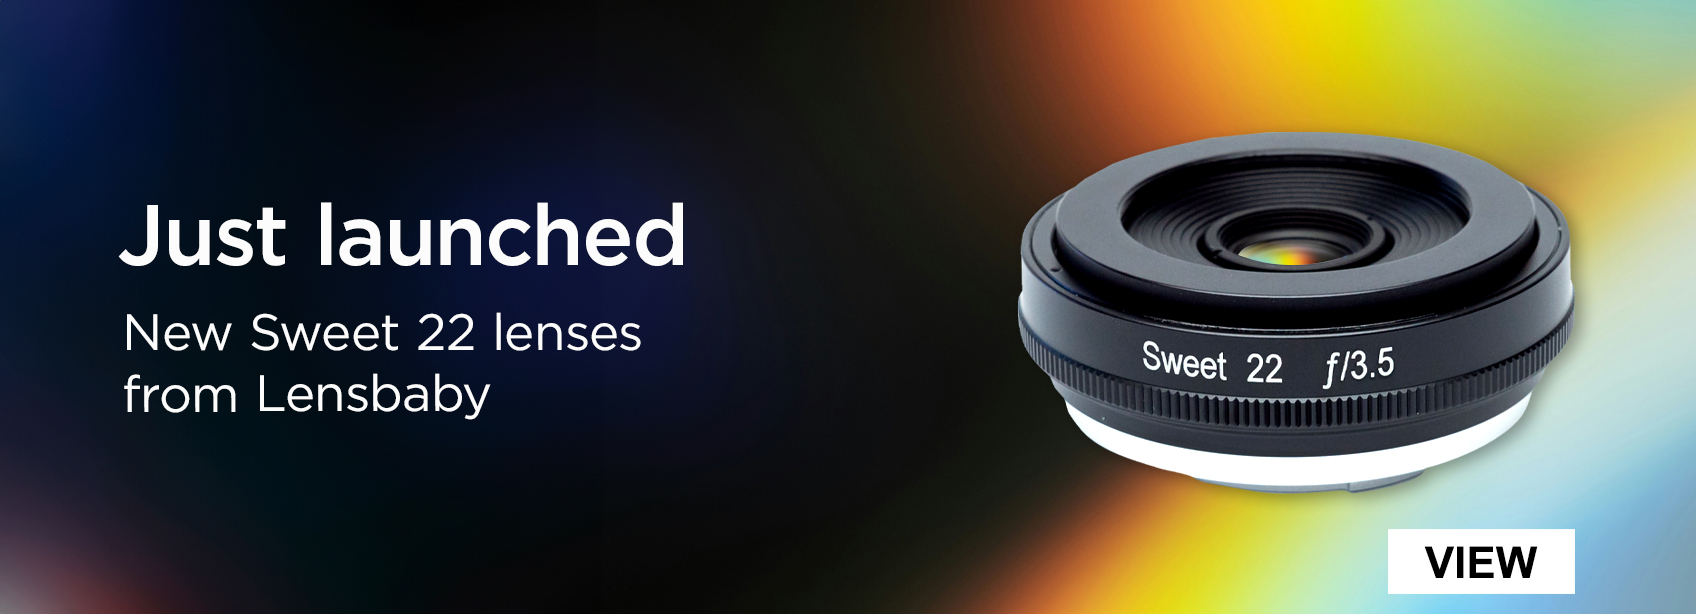 Just launched, new Sweet 22 lenses from Lensbaby